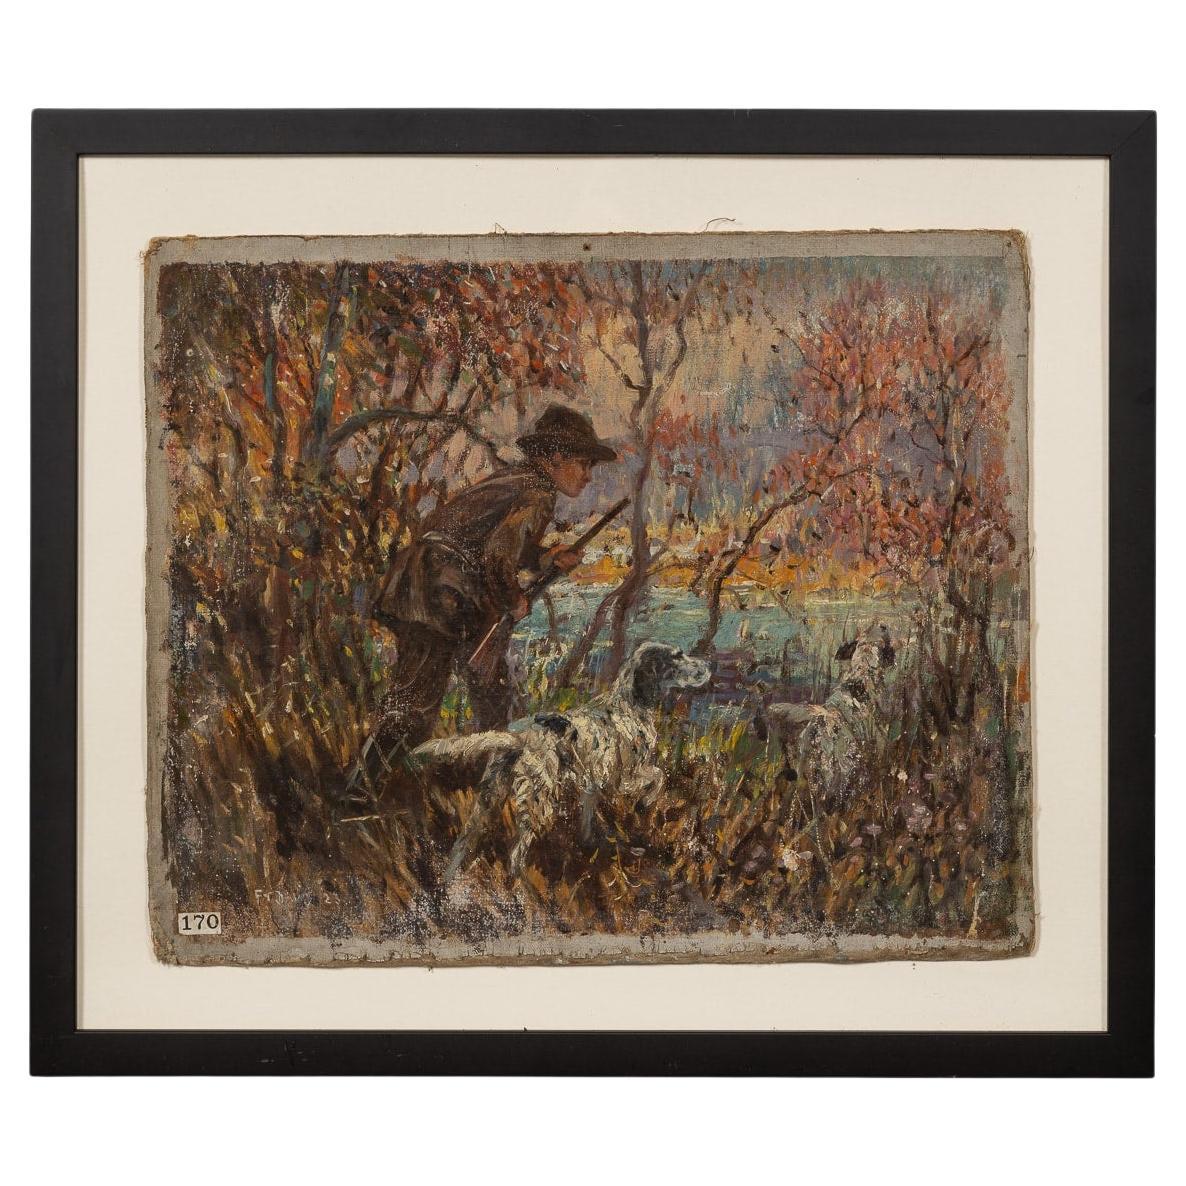 Antiquity 20thC Framed Hunting Scene Oil On Canvas By Frederick Thomas Daws c.1923